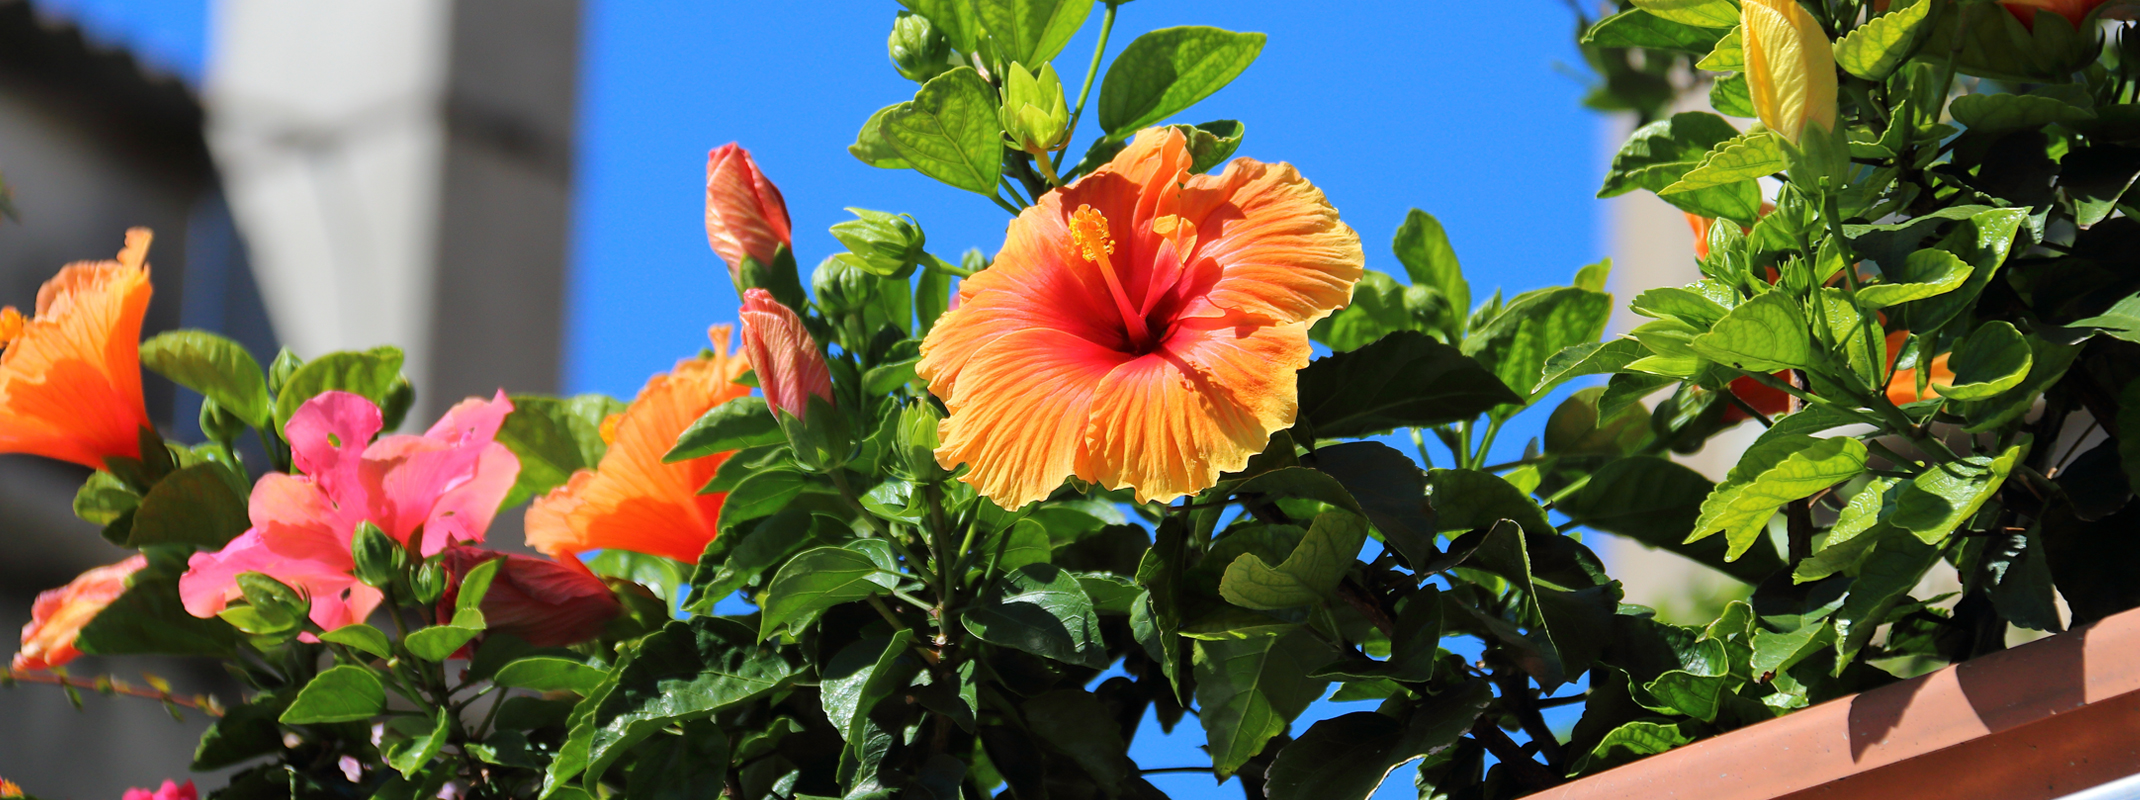 Looking up at tropical colored Hibiscus flowers (orange, red and yellow) in a planter on a balcony